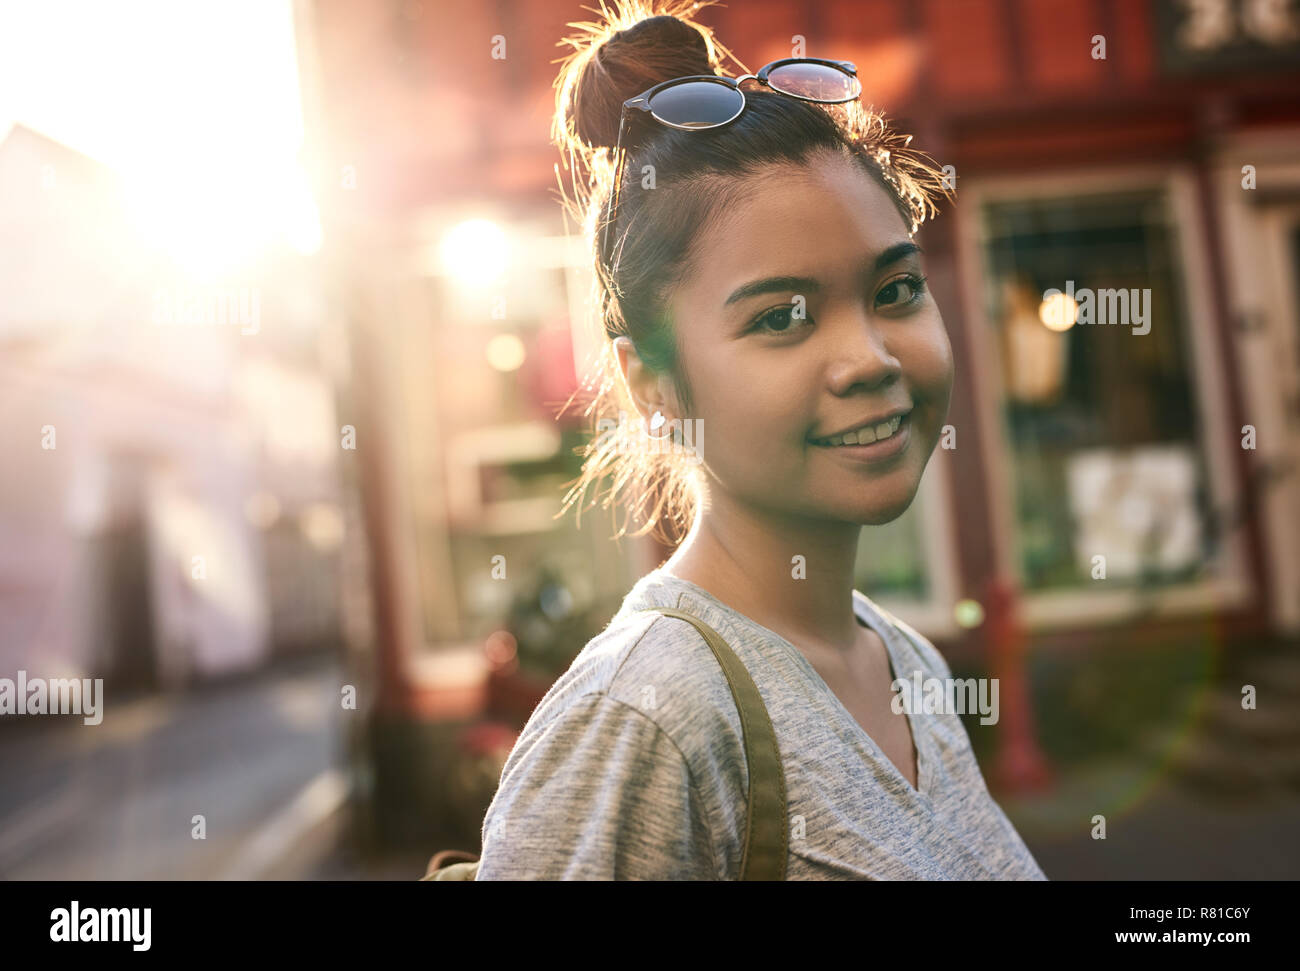 Smiling young Asian woman walking in the city Stock Photo